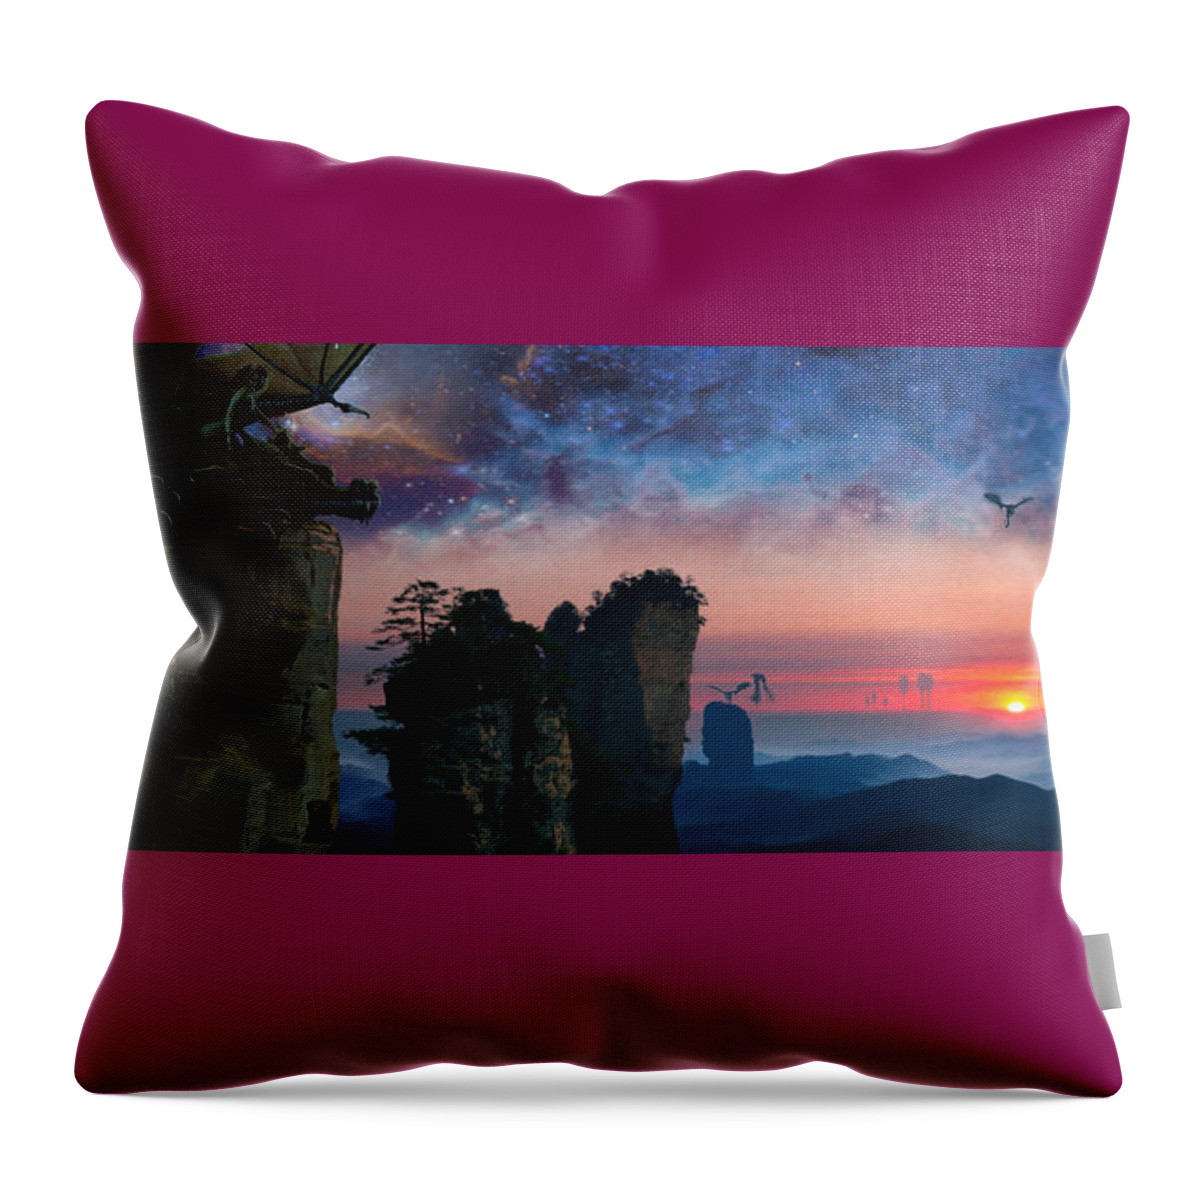 Dragon Towers Throw Pillow featuring the painting Dragon Towers by Paul Davenport